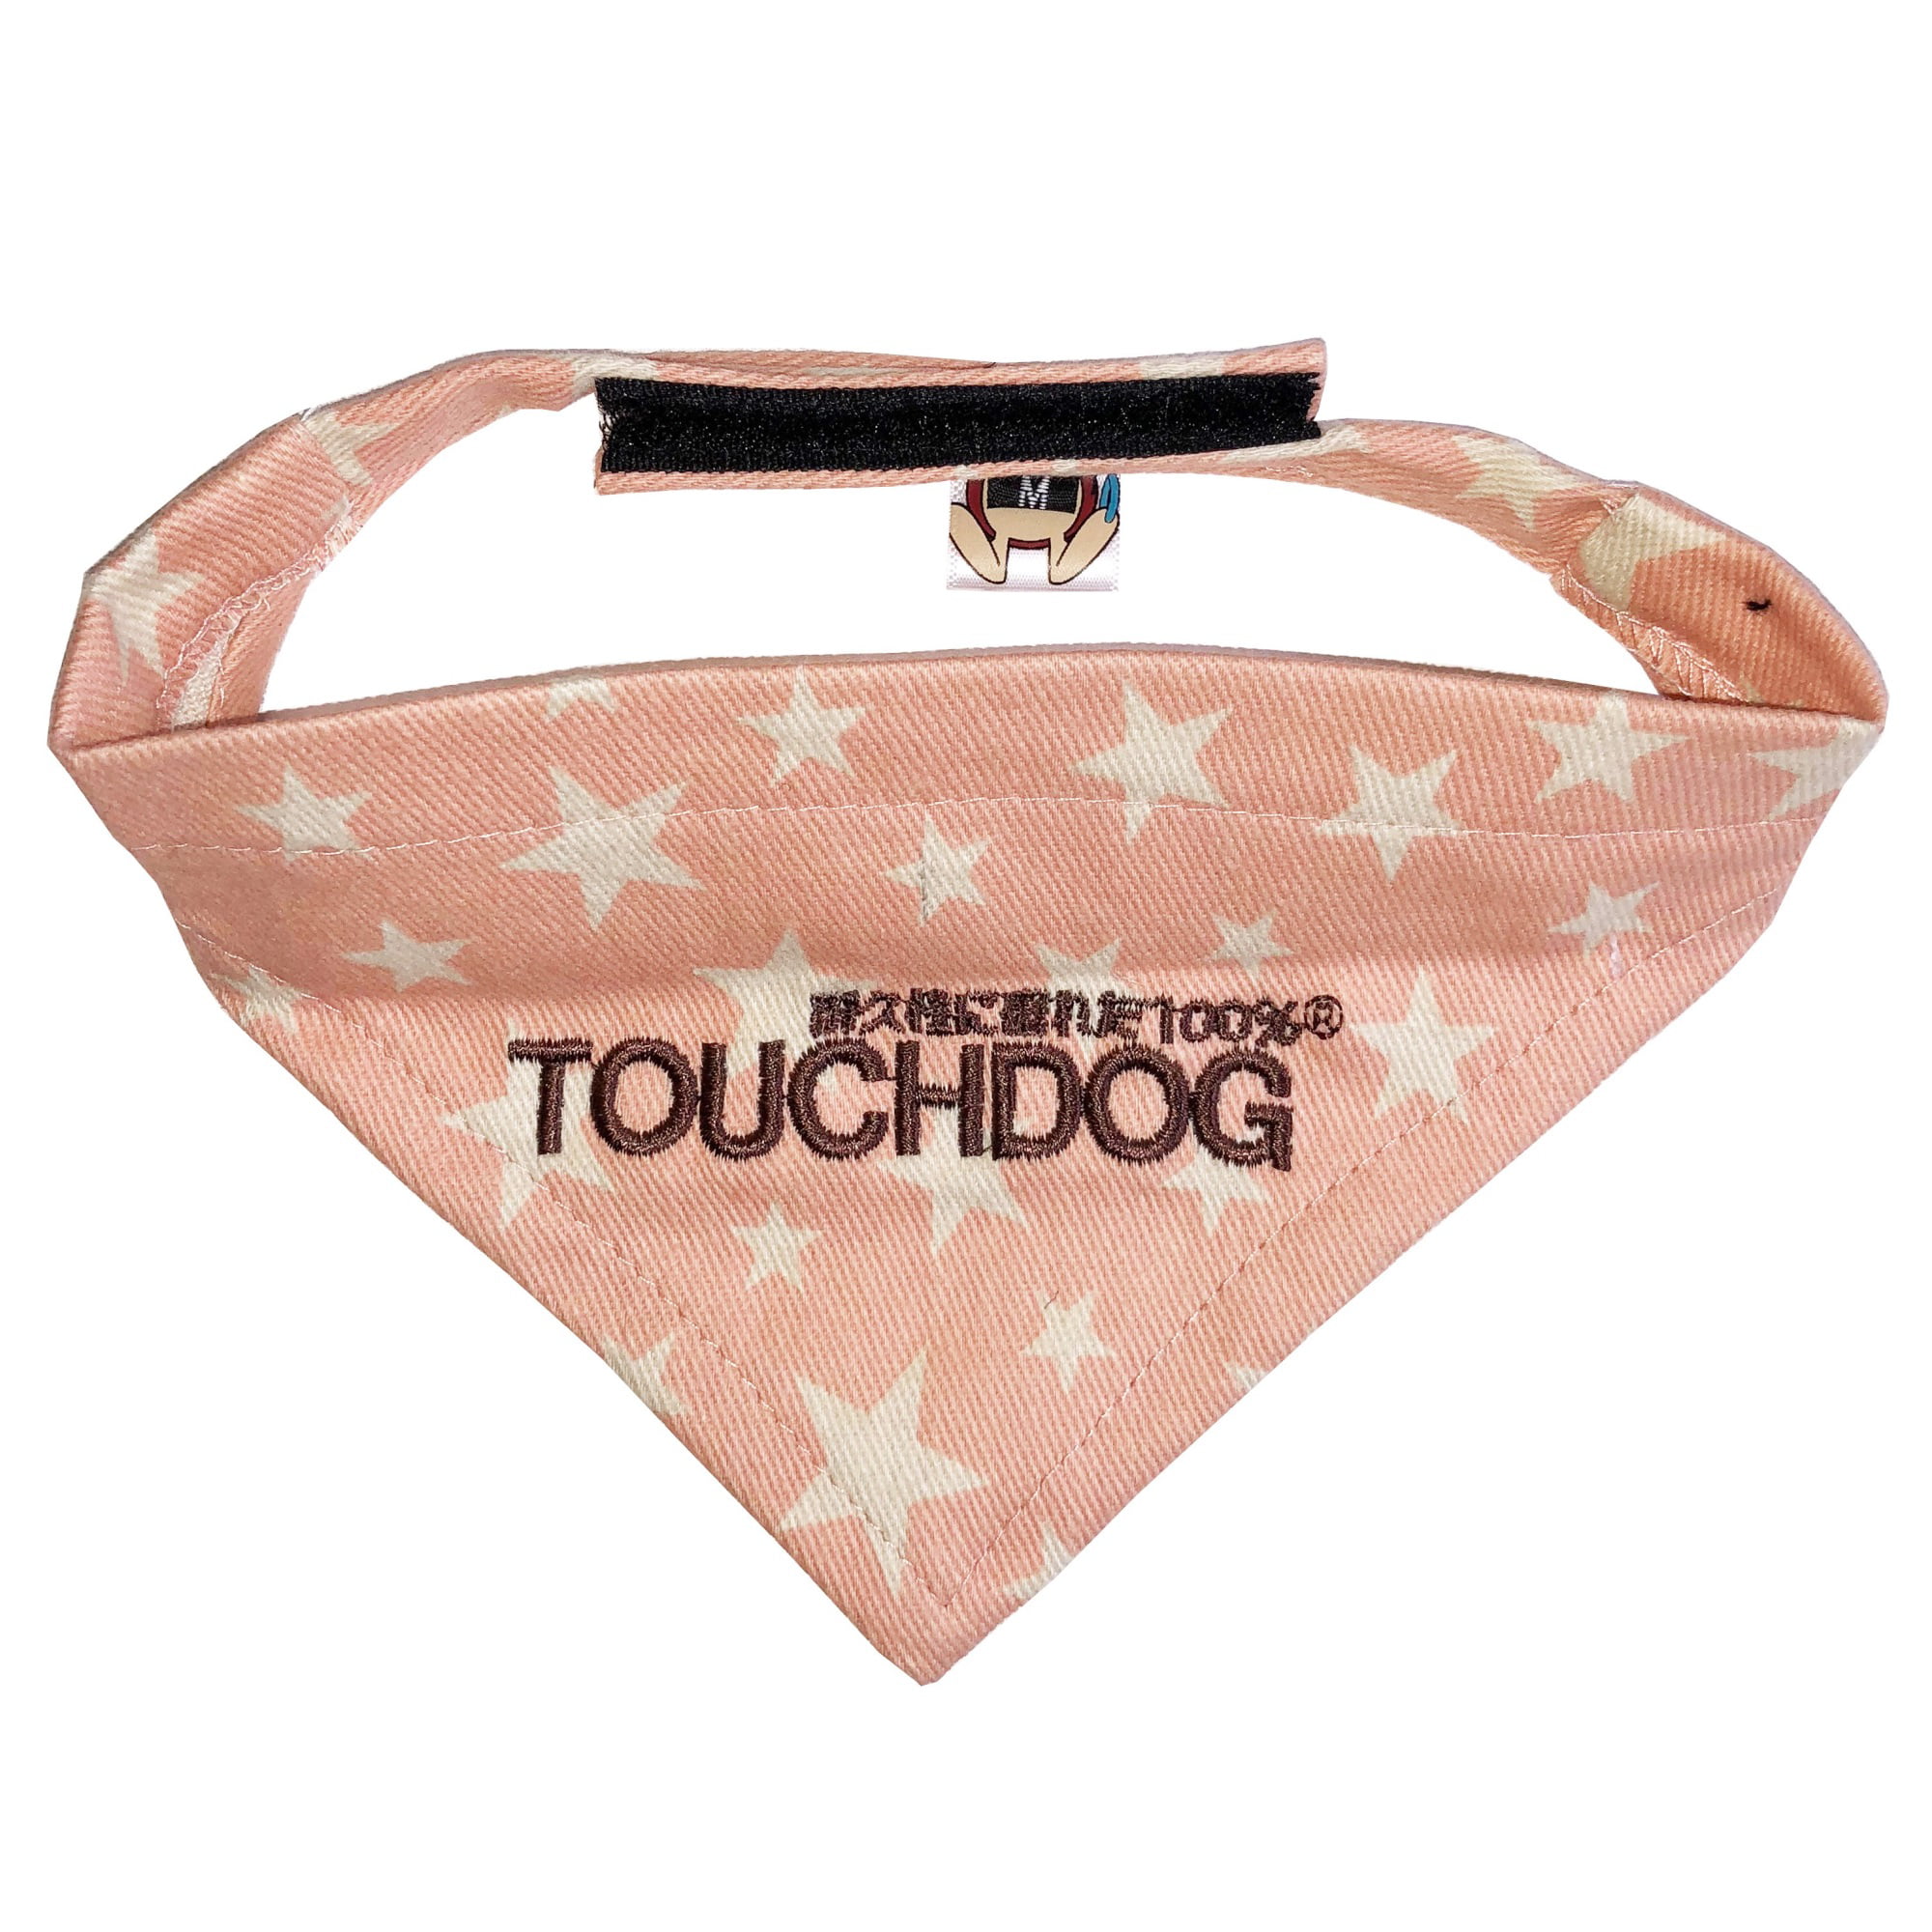 OVER THE COLLAR,clothes Bad to the Bone! pet Size S,M,L,XL Dog Bandana 